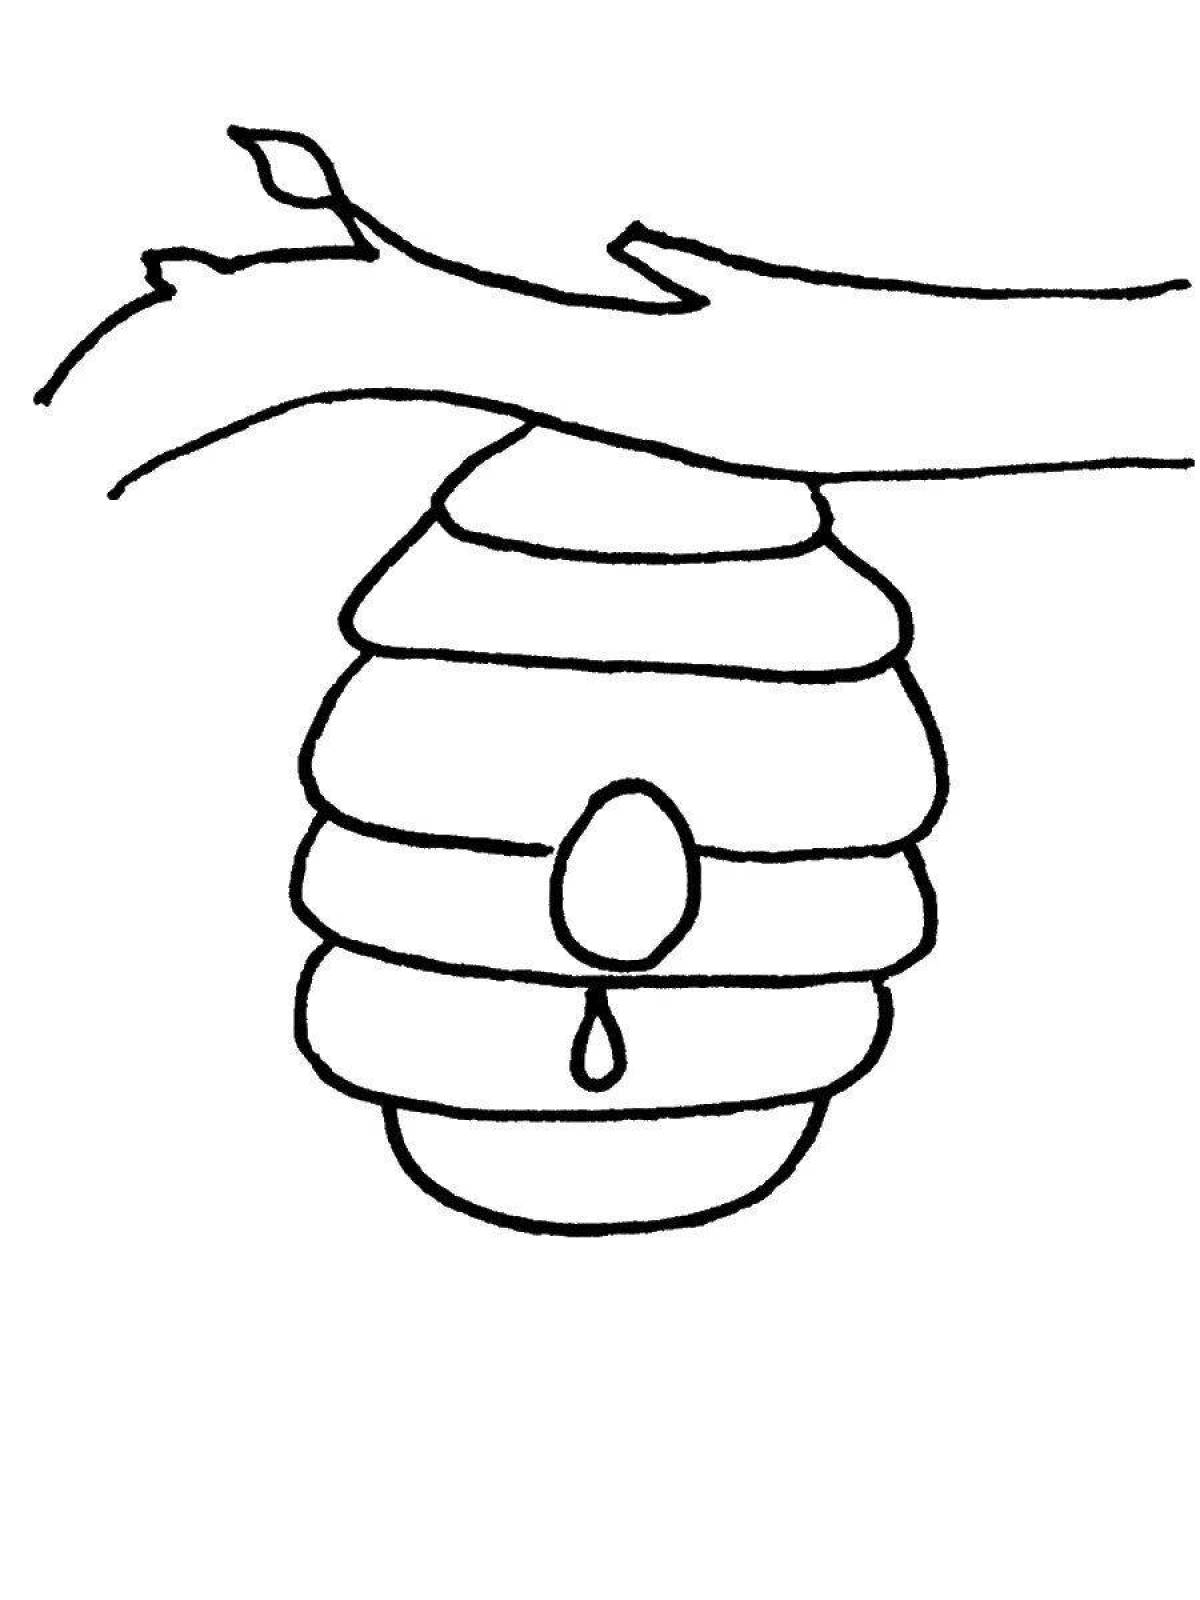 Great beehive coloring book